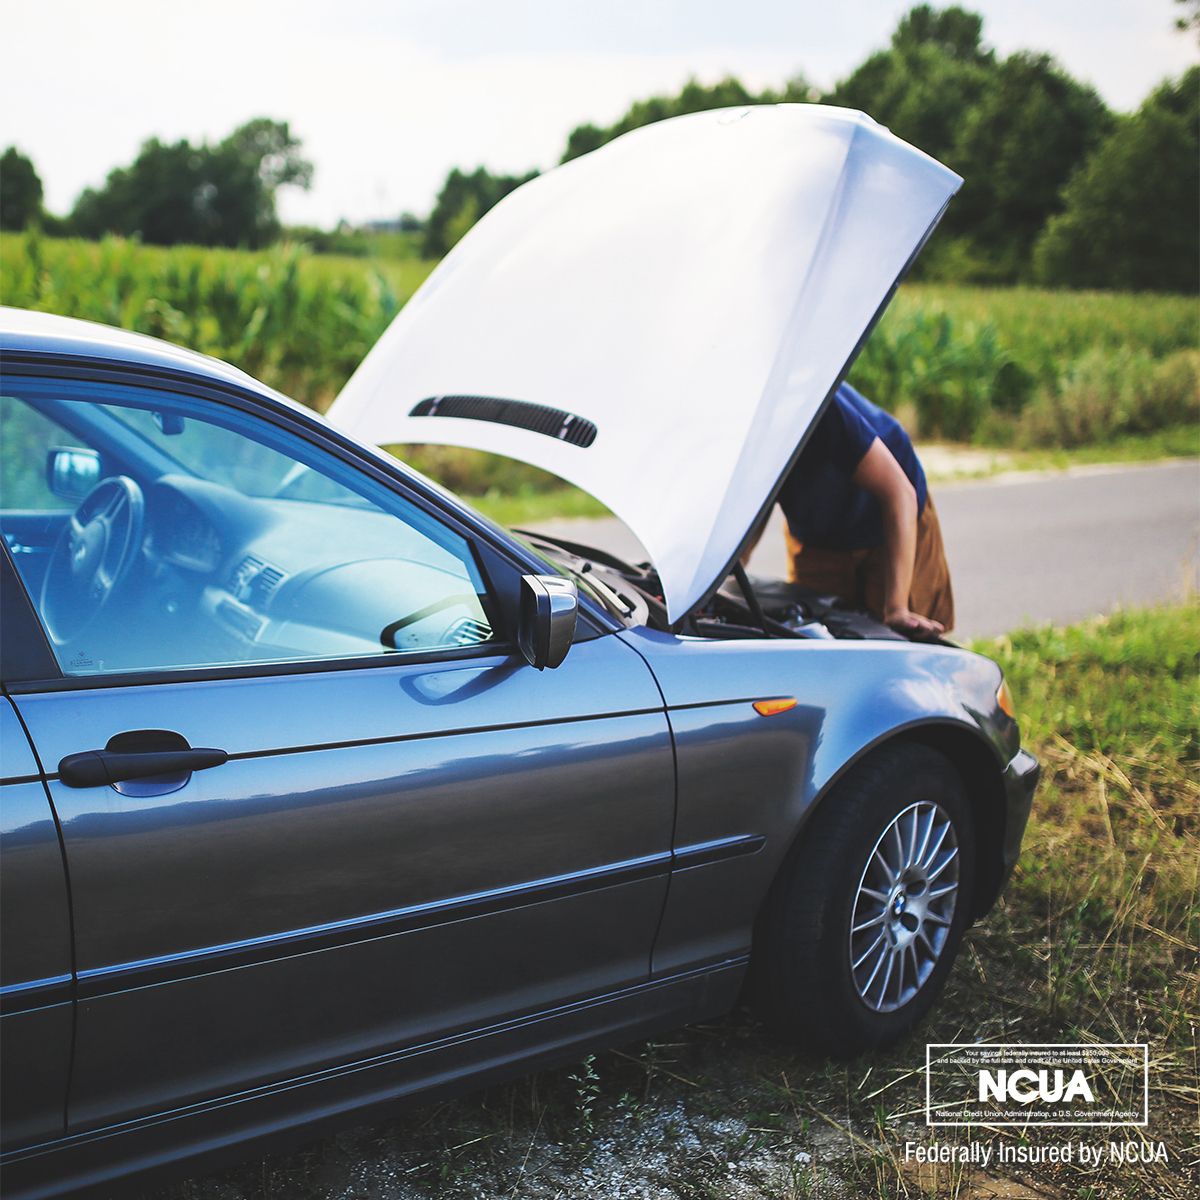 Mechanical Breakdown Insurance is supplemental auto insurance that covers major failures that may be excluded from general auto insurance coverage.